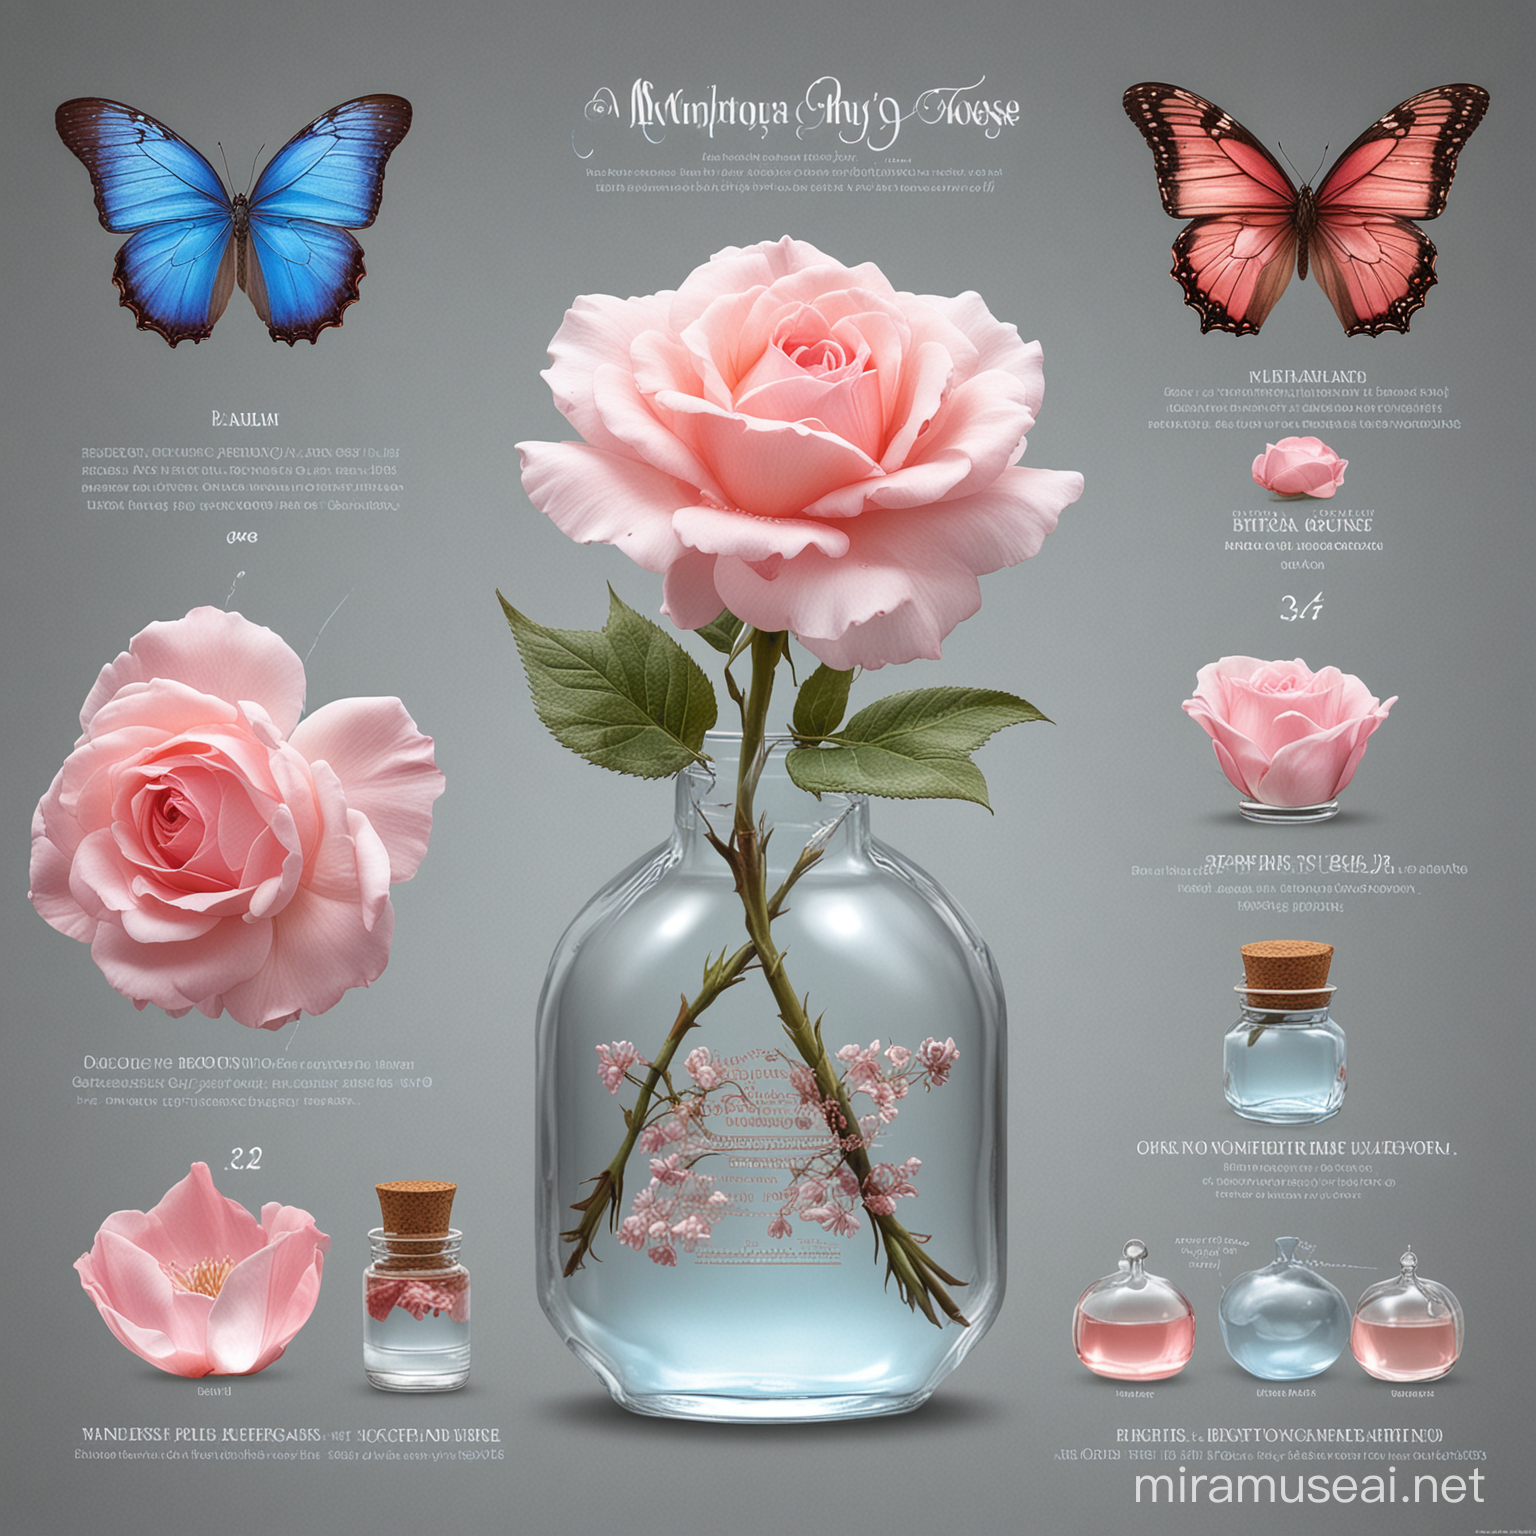 Exquisite Morpho Rose Infographic with Crystal Decorations